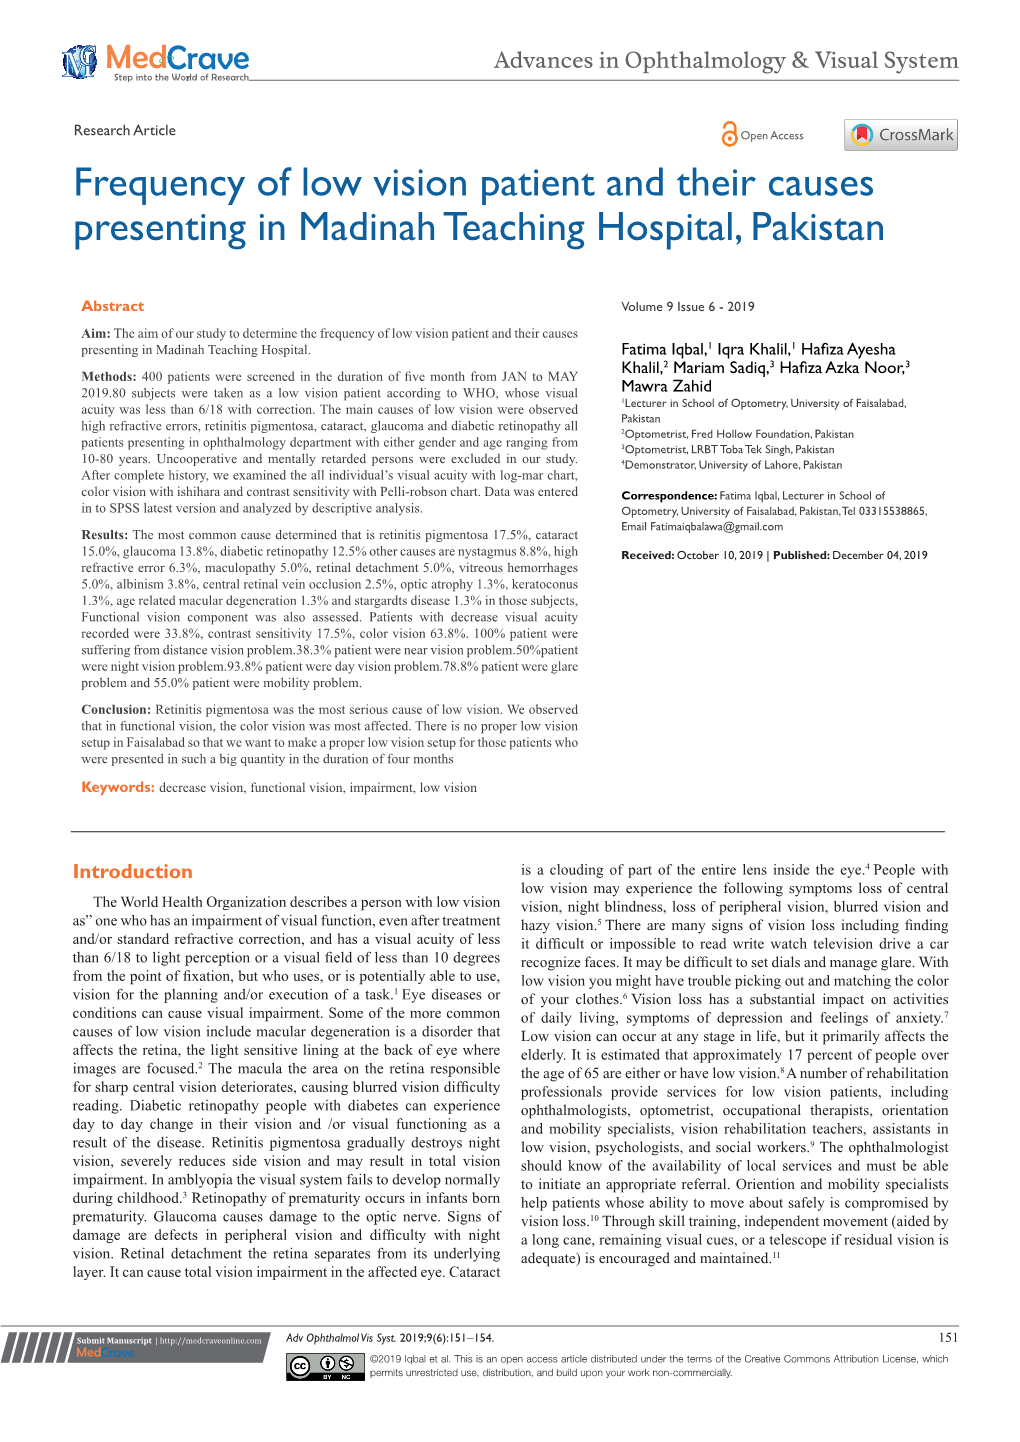 Frequency of Low Vision Patient and Their Causes Presenting in Madinah Teaching Hospital, Pakistan